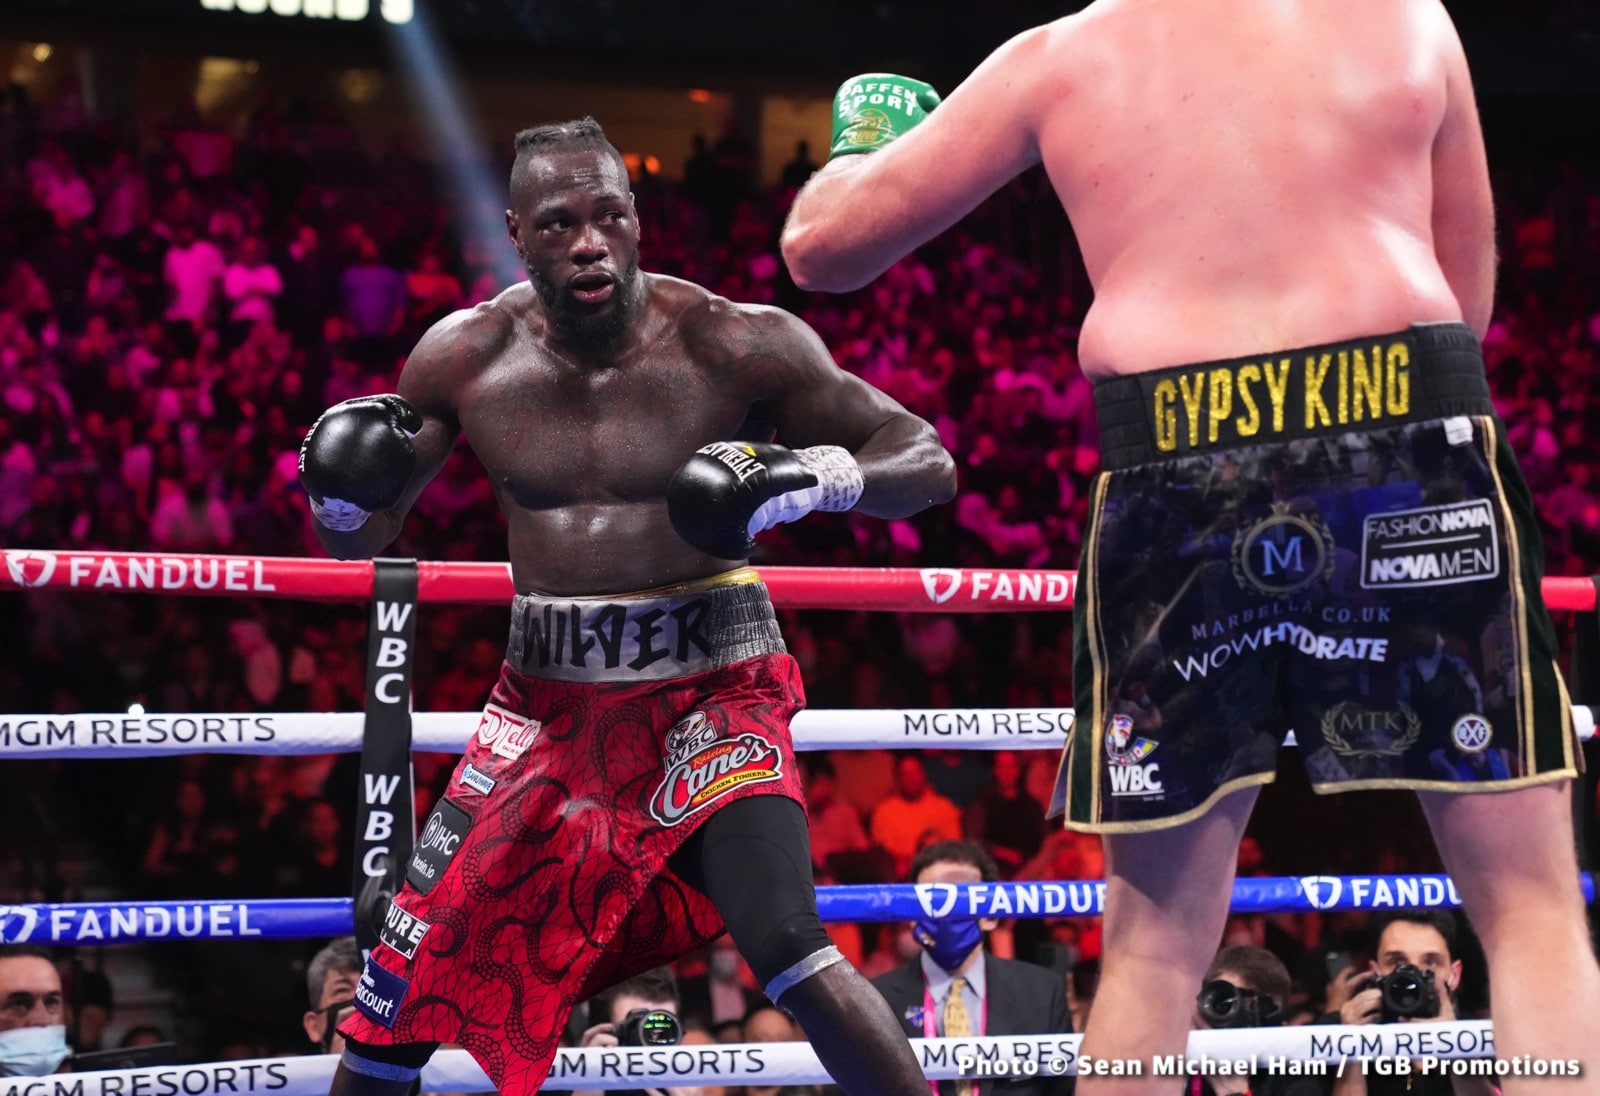 Image: David Haye: Deontay Wilder stayed on the battlefield until he ran out of bullets